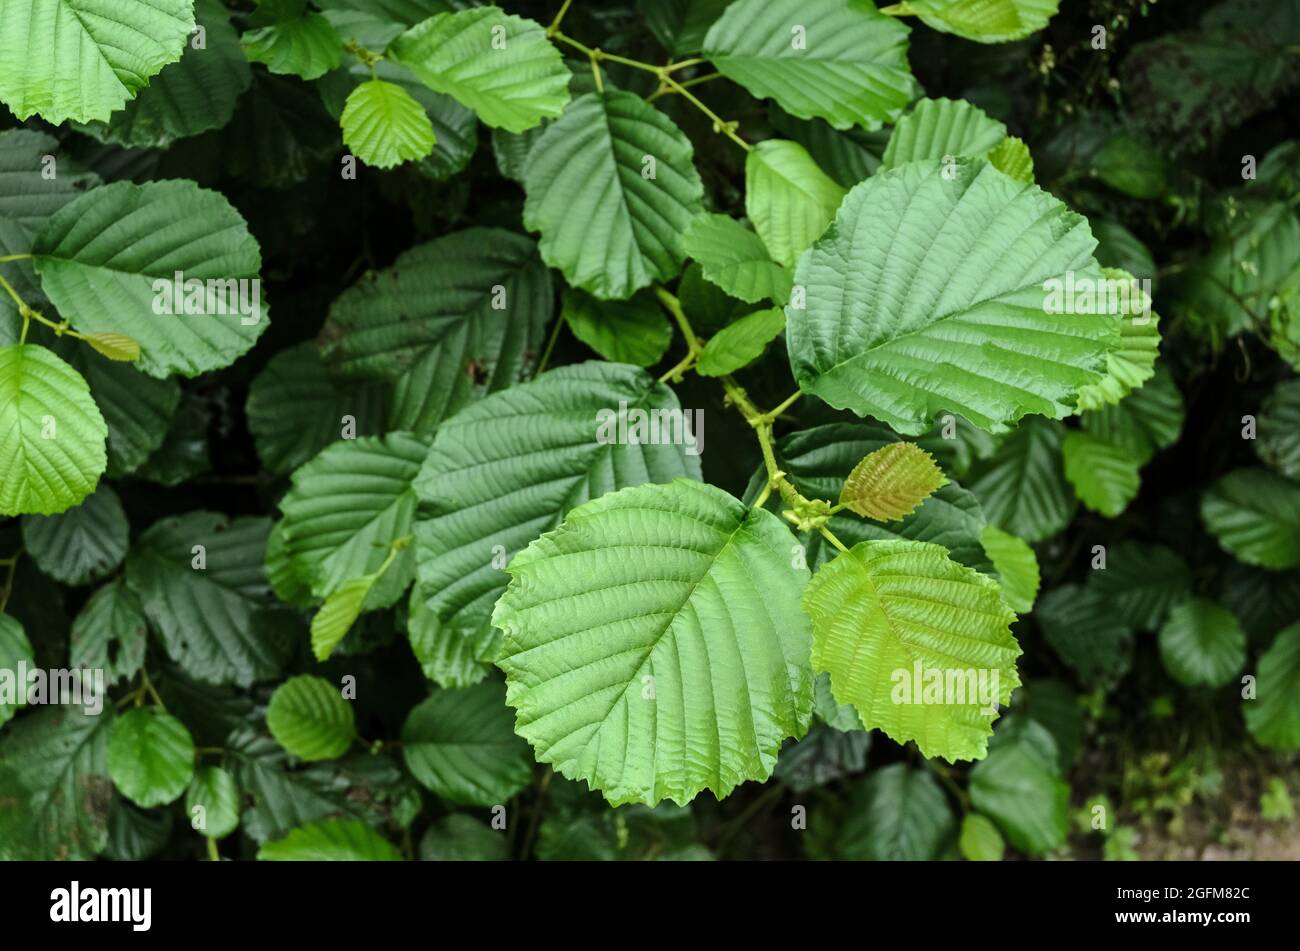 Alnus glutinosa, known as the common alder, black alder, European alder, European black alder, or alder, green plant leaves in Germany, Europe Stock Photo